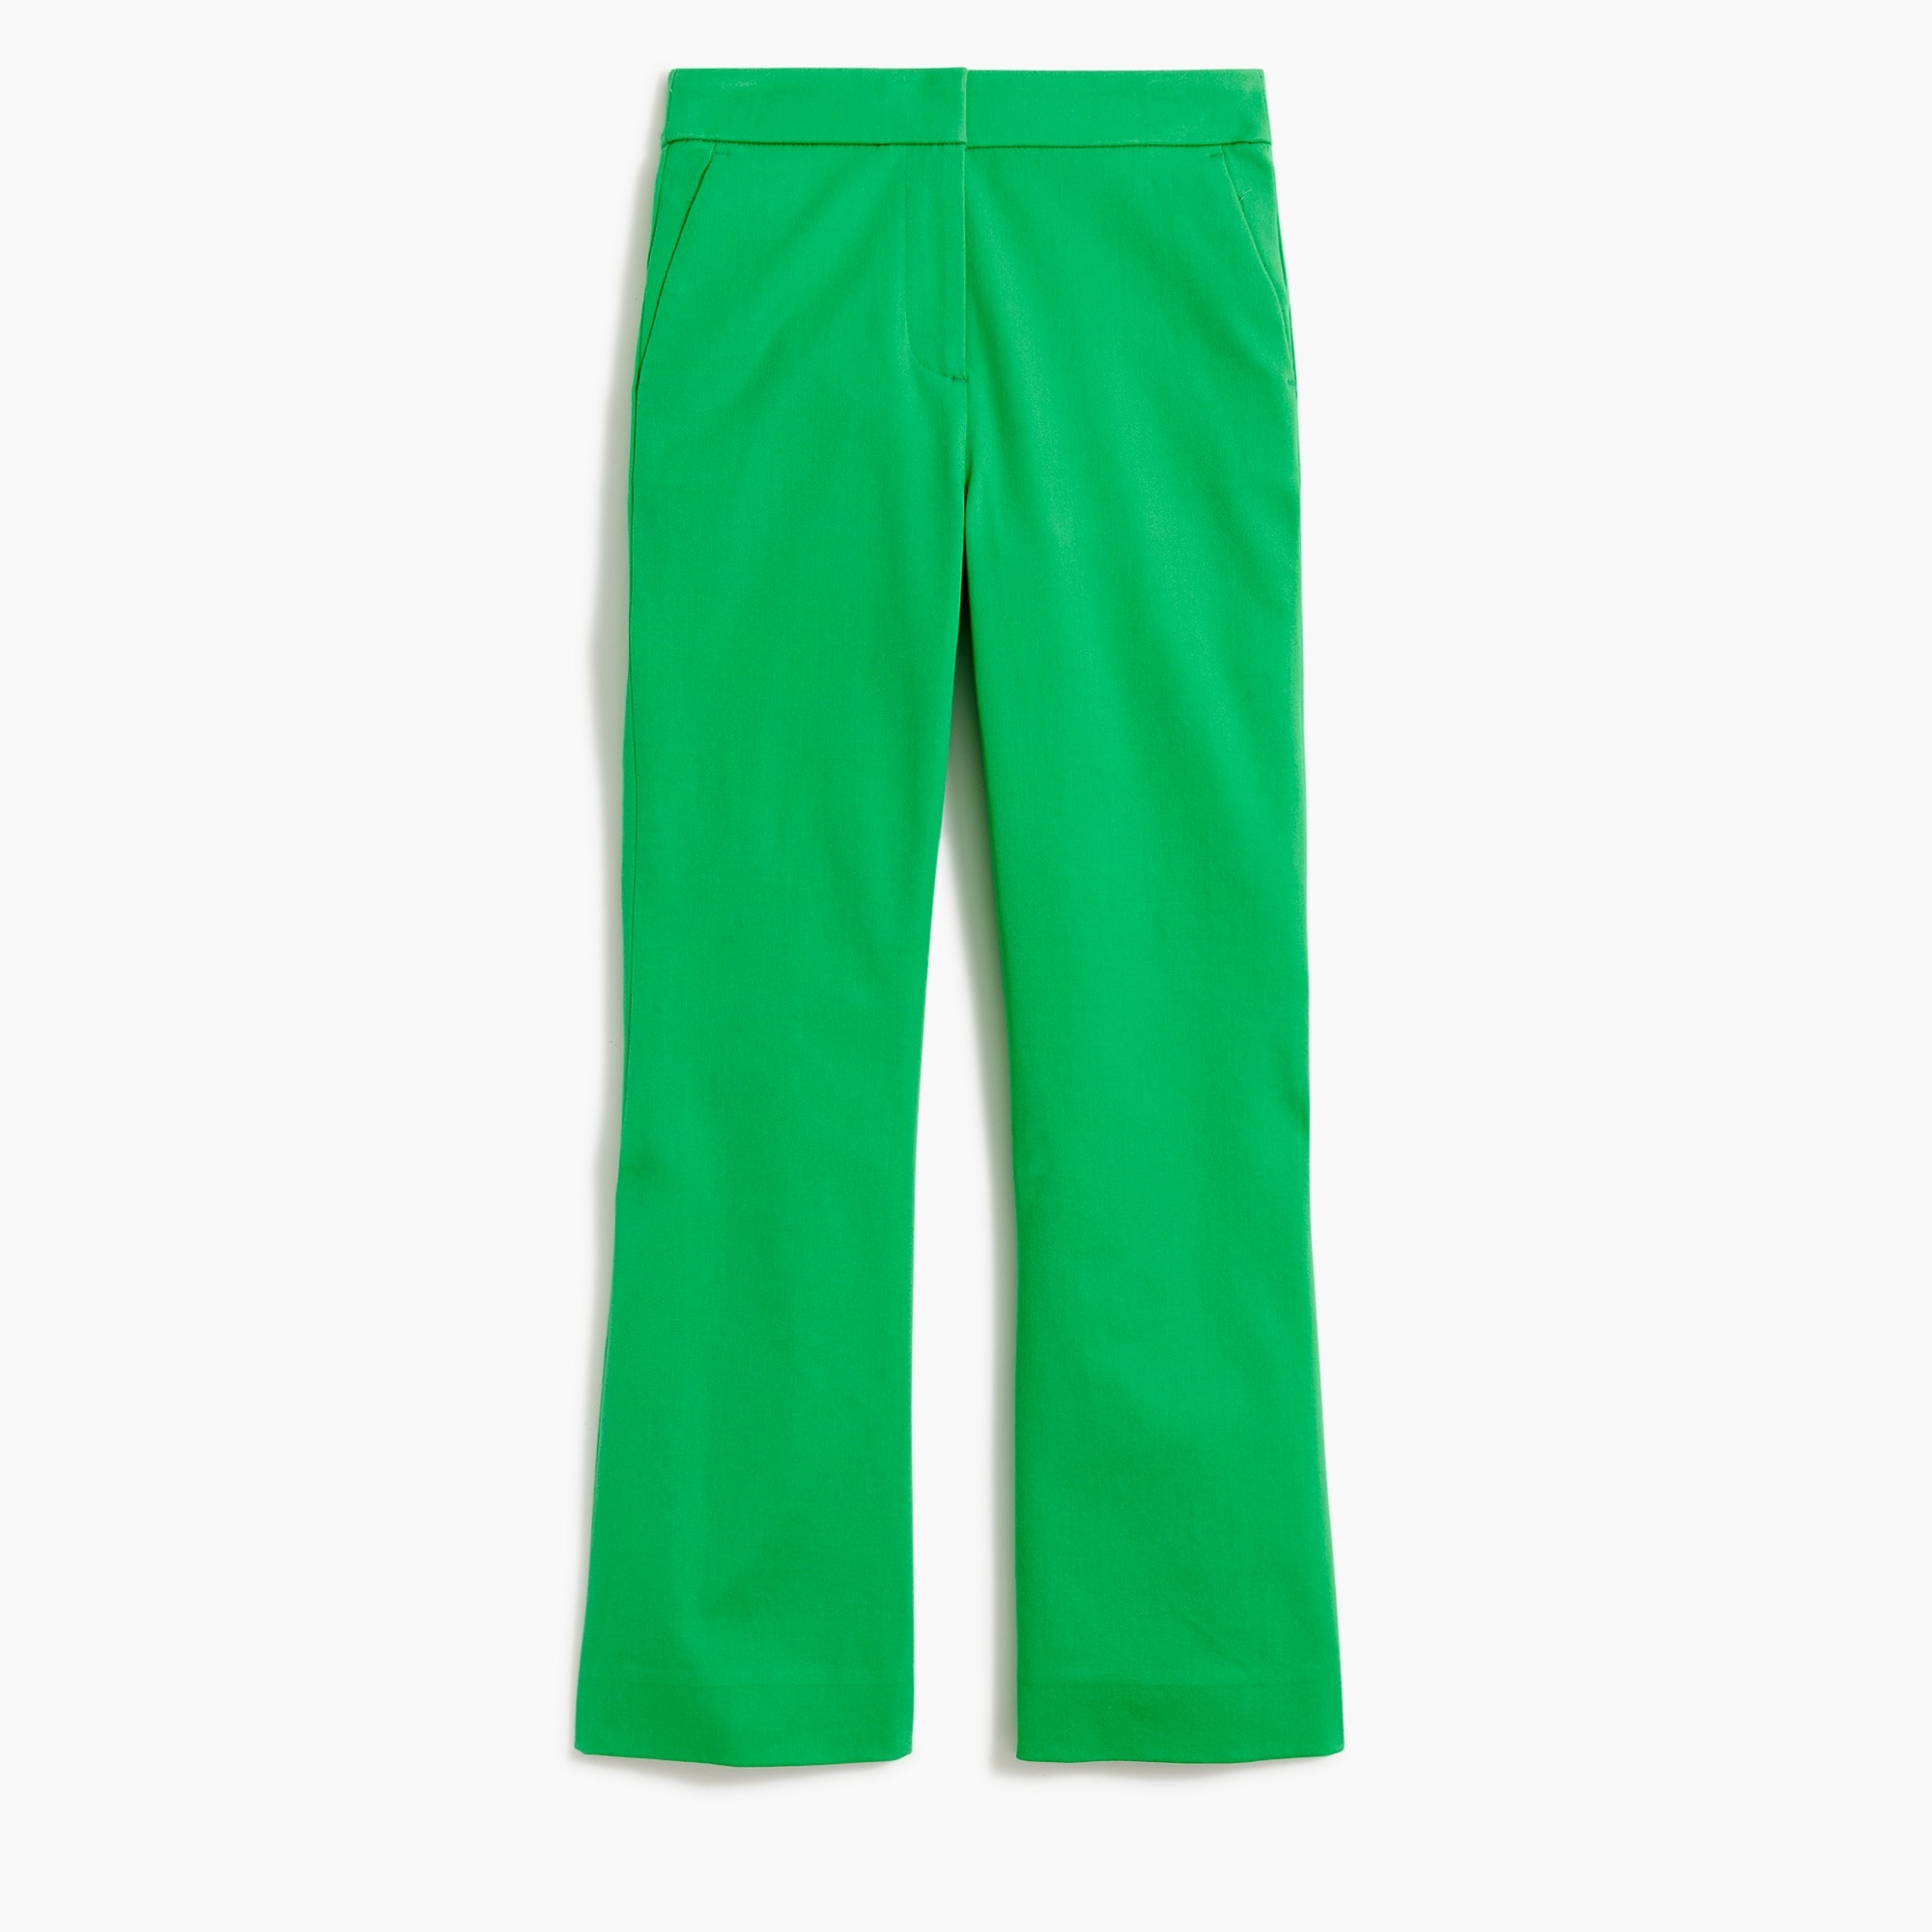  Kelsey flare pant